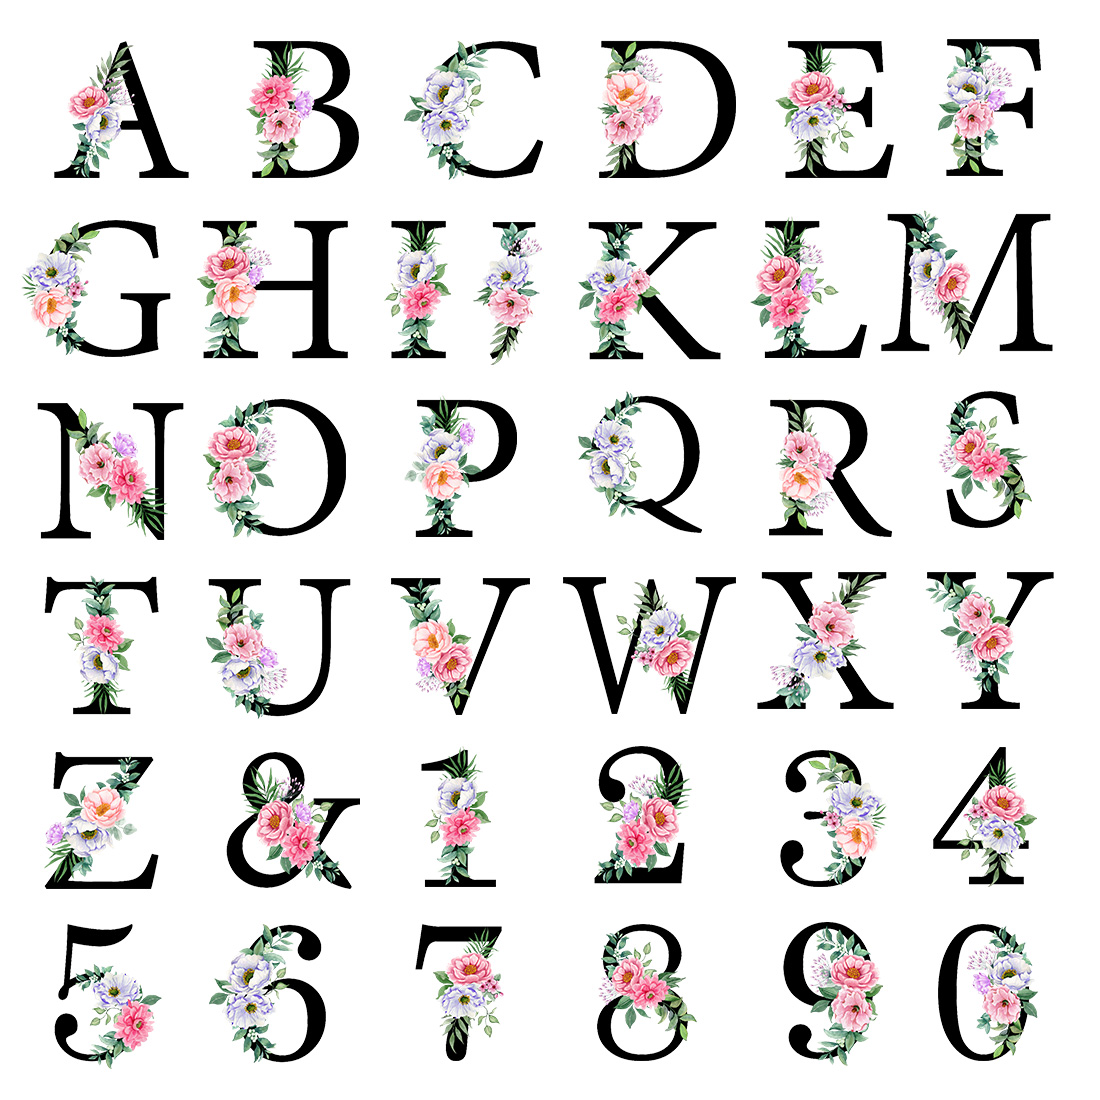 Alphabet with Watercolor Flowers, Letters, Monogram, Numbers, letters and numbers.